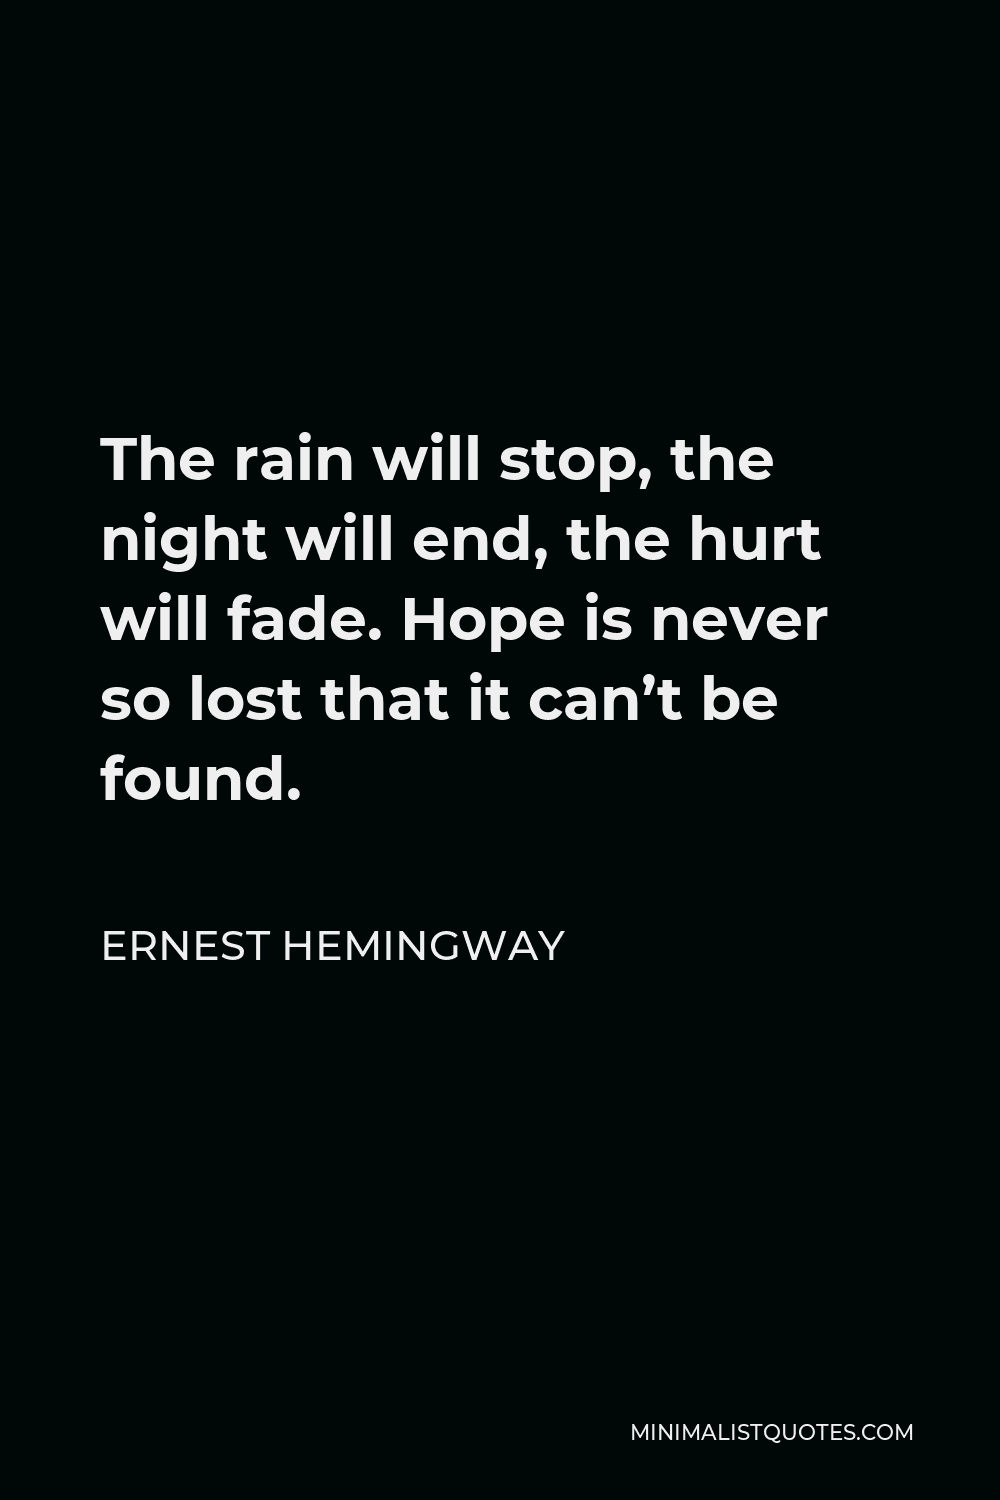 Ernest Hemingway Quote - The rain will stop, the night will end, the hurt will fade. Hope is never so lost that it can’t be found.